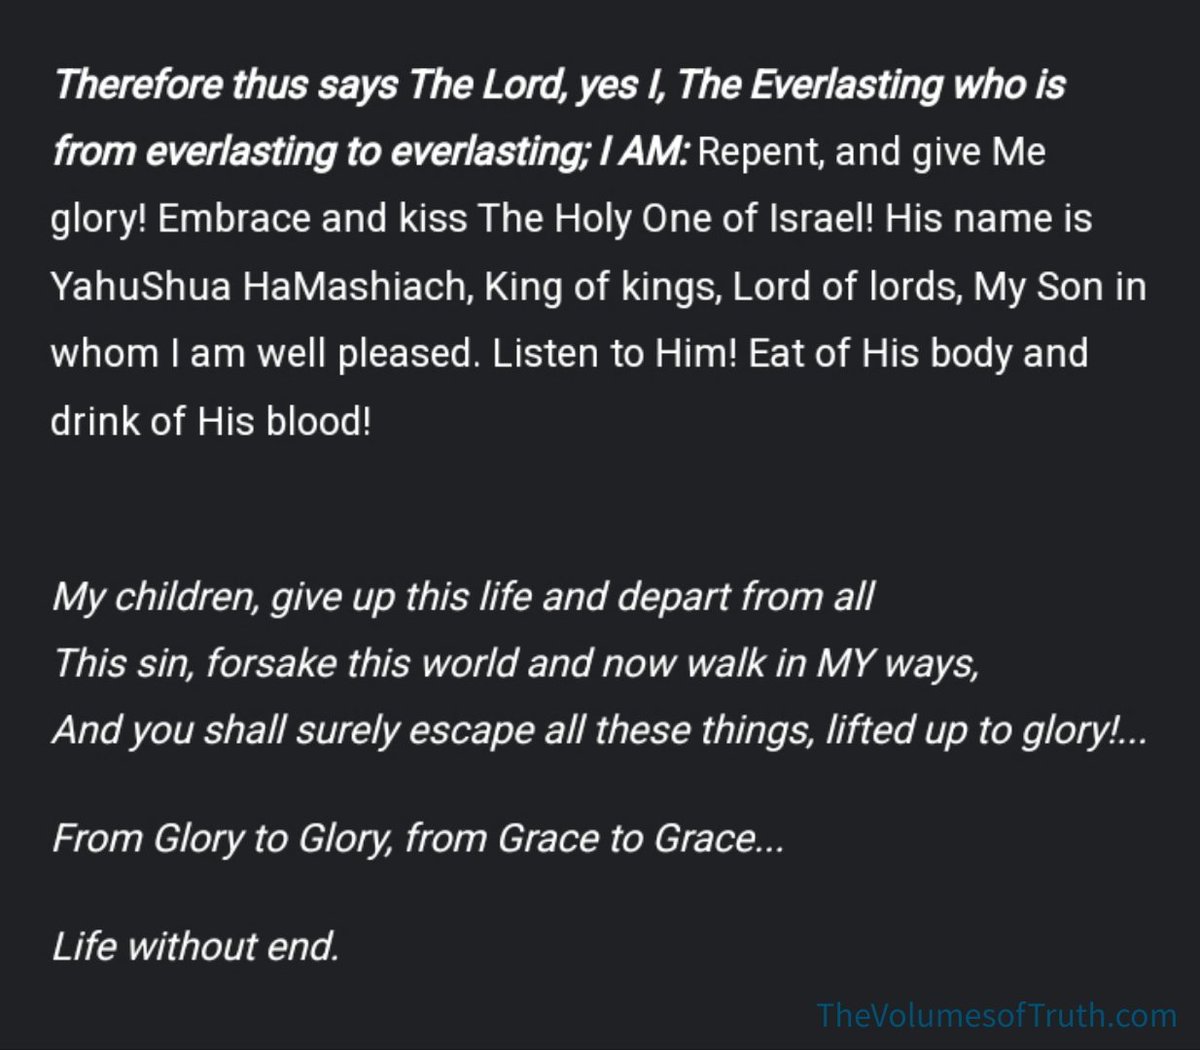 📖 Excerpt from: thevolumesoftruth.com/A_Day_of_Thick…

#thussaysthelord #Everlasting #IAM #repent #glory #embrace #kiss #TheHolyOneofIsrael #YahuShua #HaMashiach #Jesus #TheChrist #TheMessiah #kingofkings #lordoflords #SonofGod #life #depart #sin #forsake #world #escape #rapture #grace